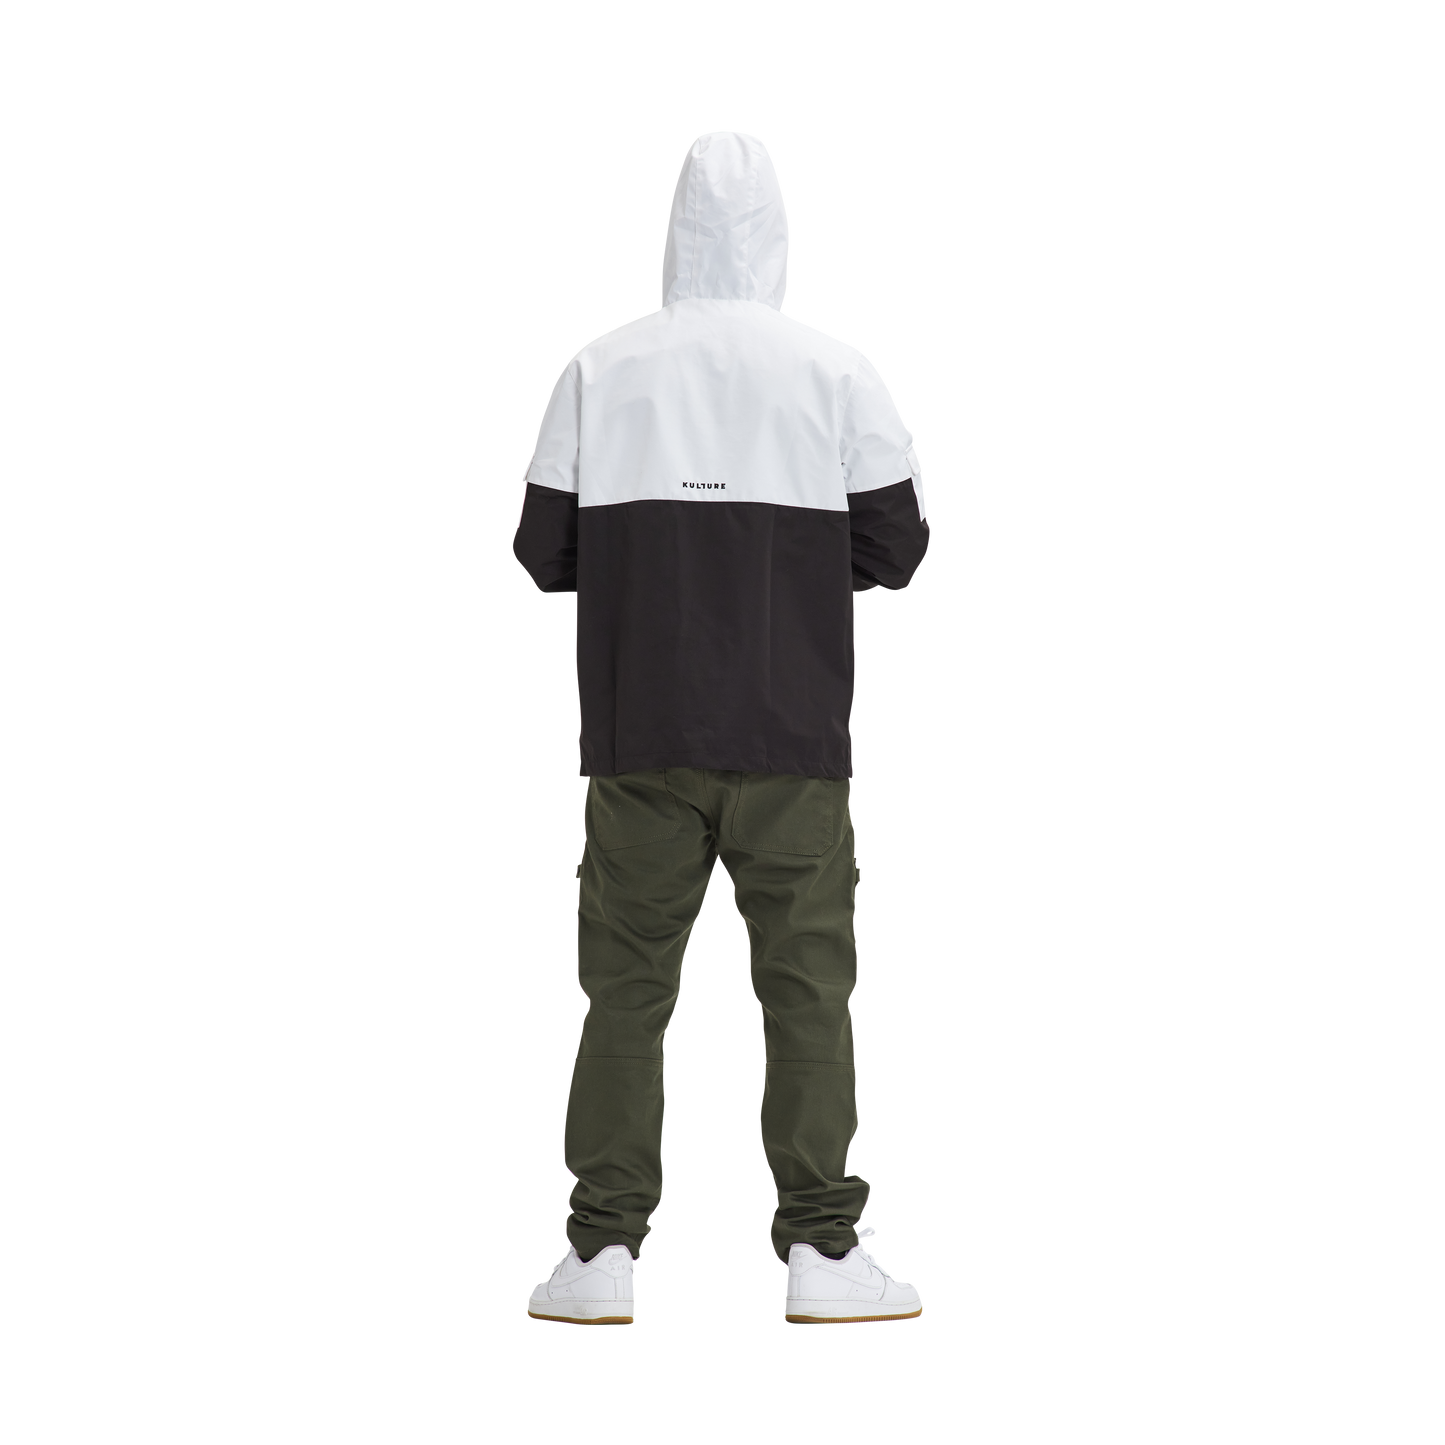 A man wearing a Kulture LAX V1 Hooded Anorak jacket in white and black and green pants.